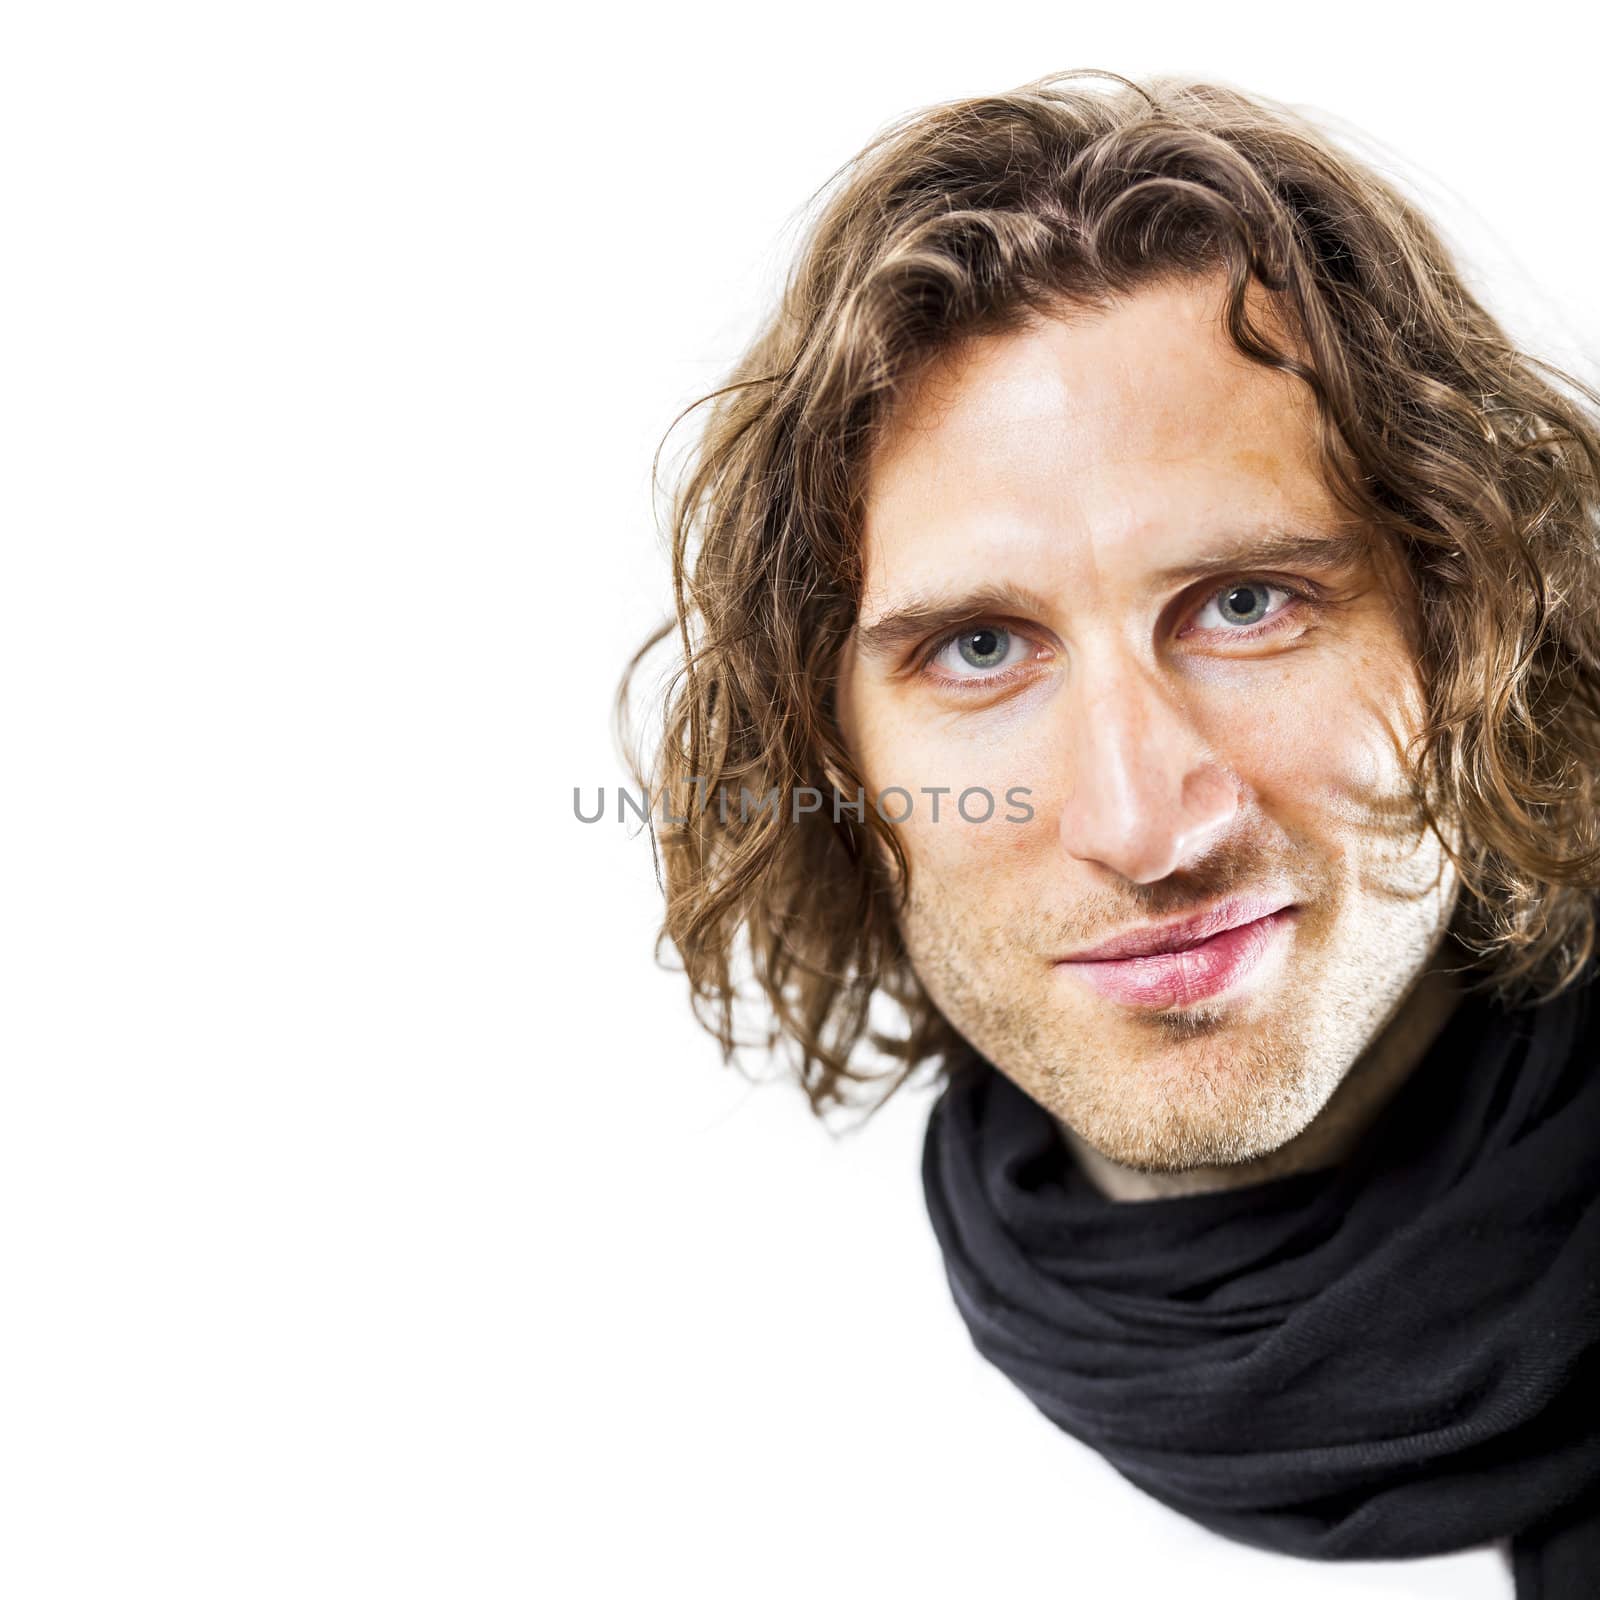 An image of a handsome man with a curly hairdo